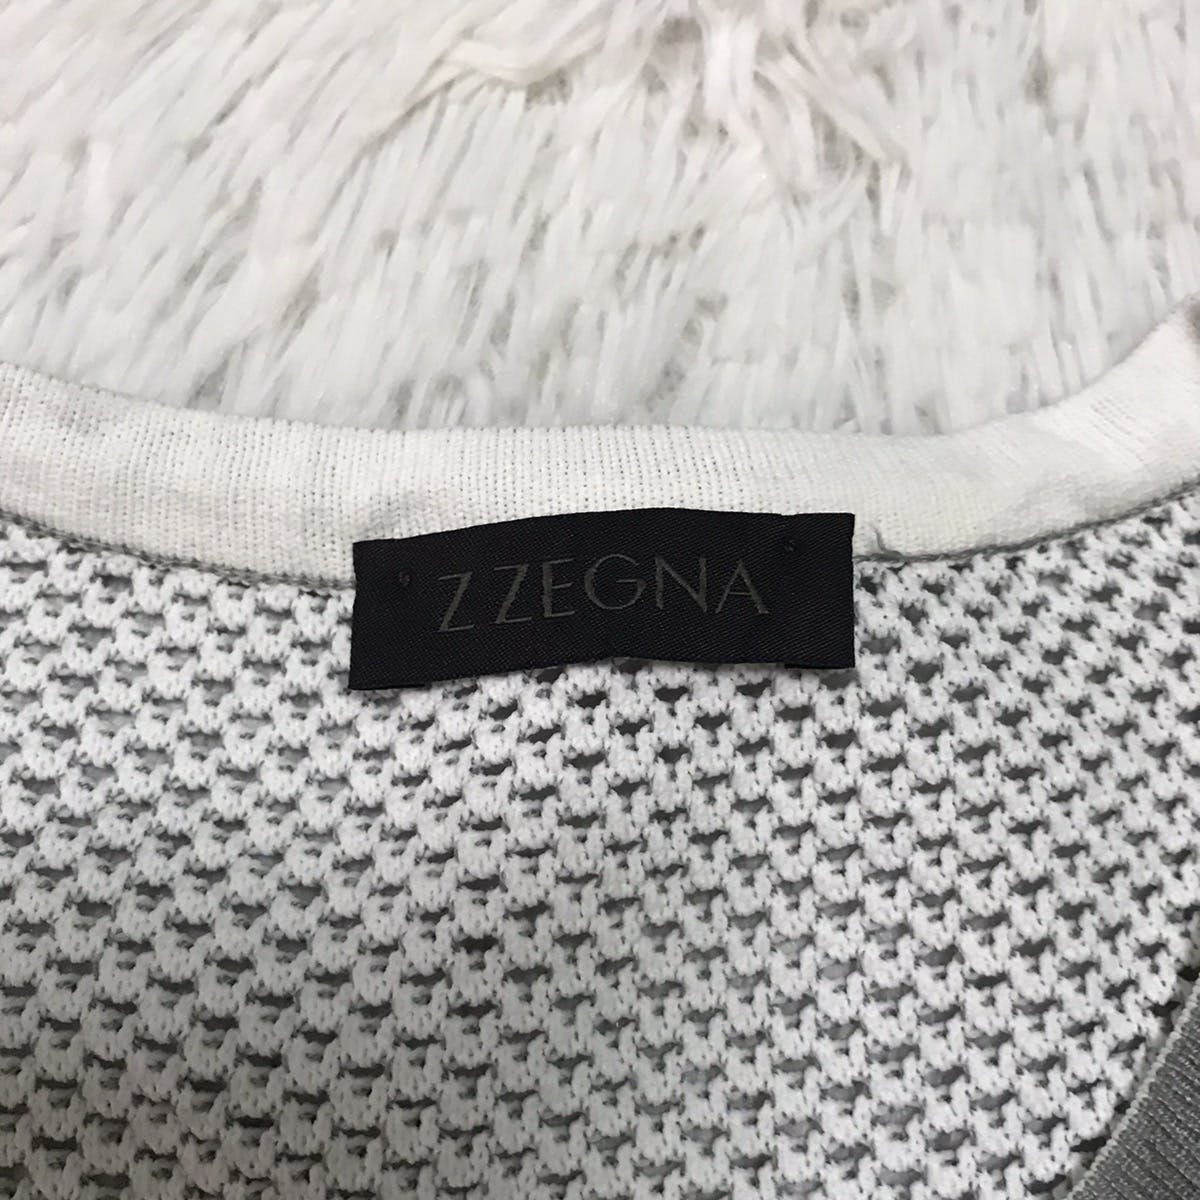 Z Zegna Netting Knitwear Maglia Tricots Made in Romania - 8